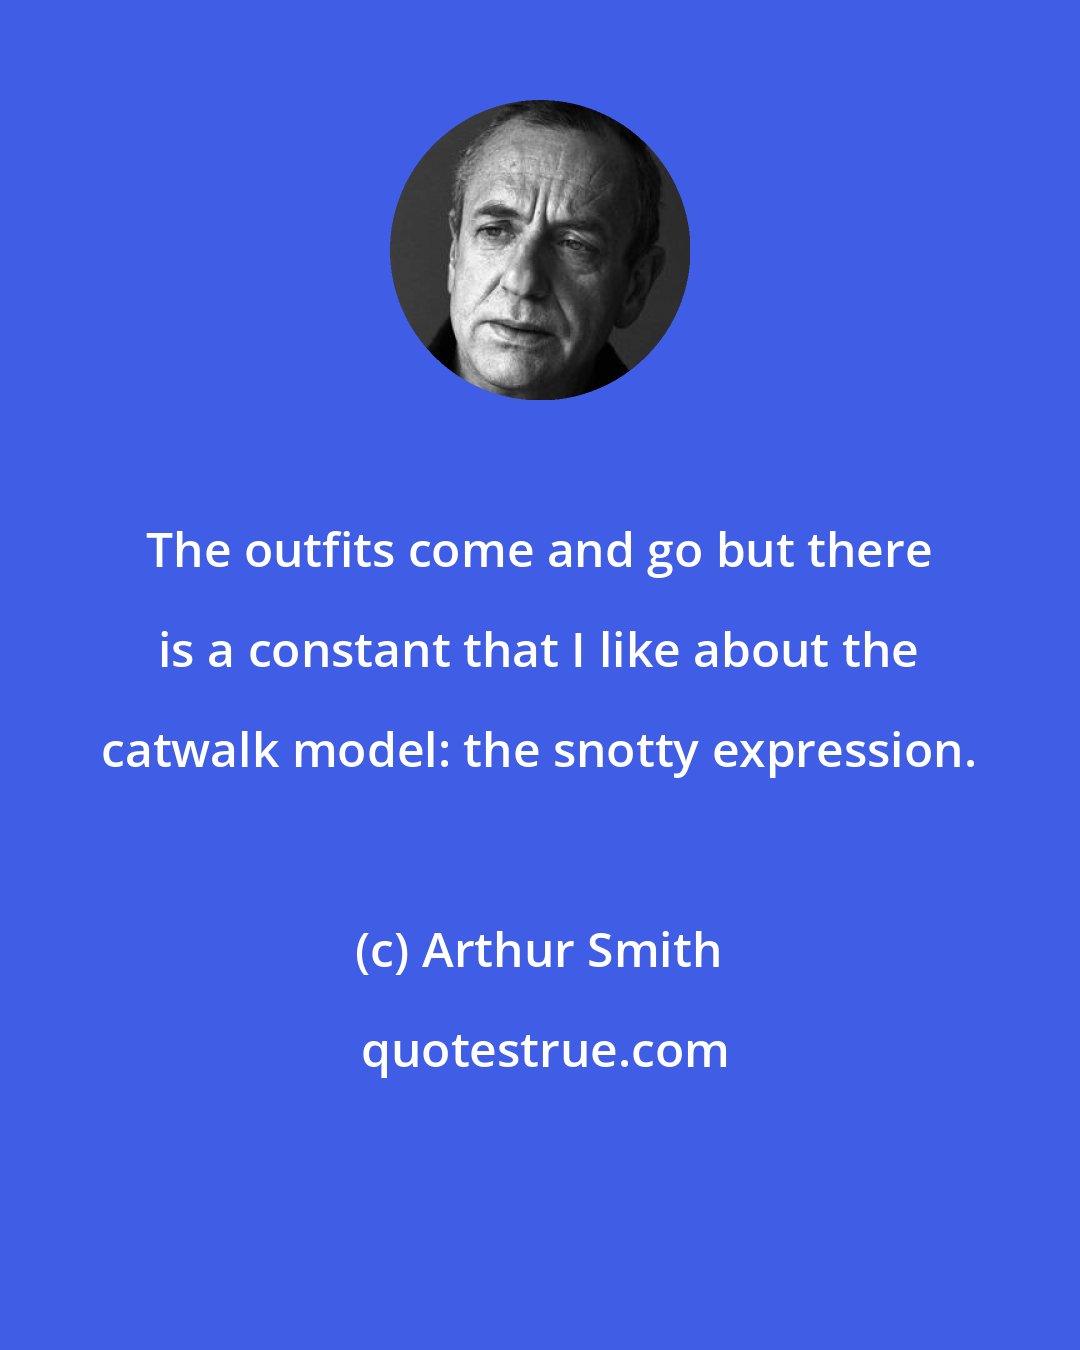 Arthur Smith: The outfits come and go but there is a constant that I like about the catwalk model: the snotty expression.